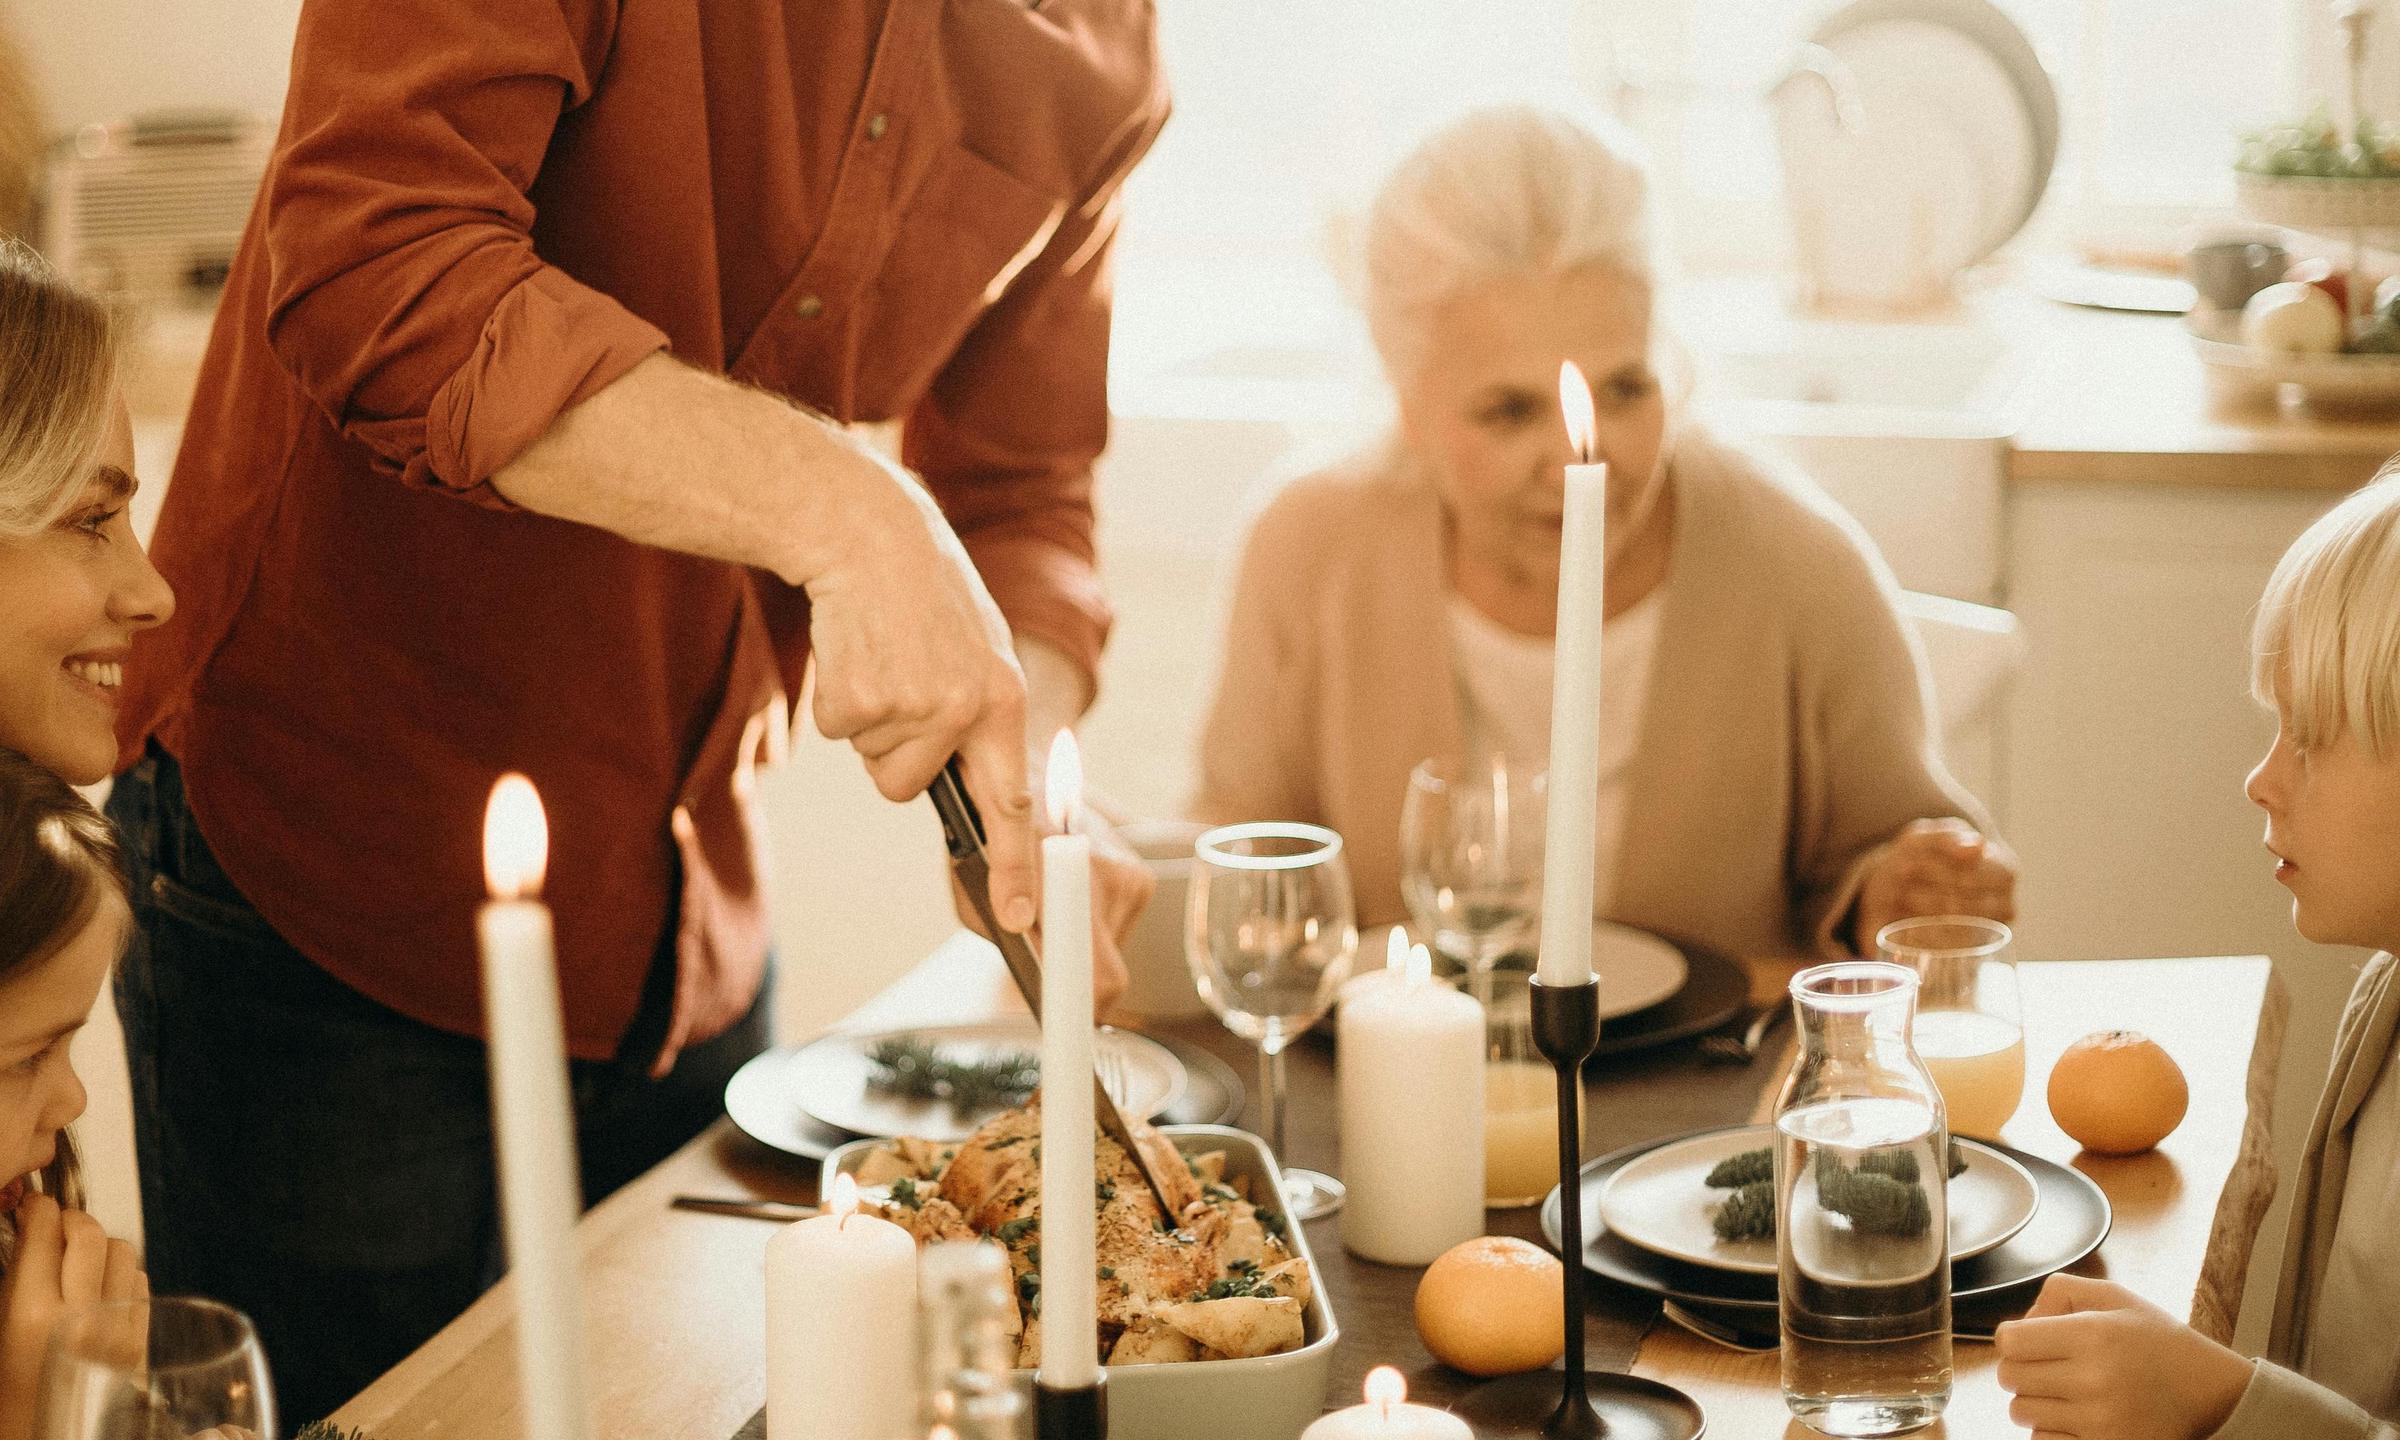 A family enjoying a meal together | Source: Pexels